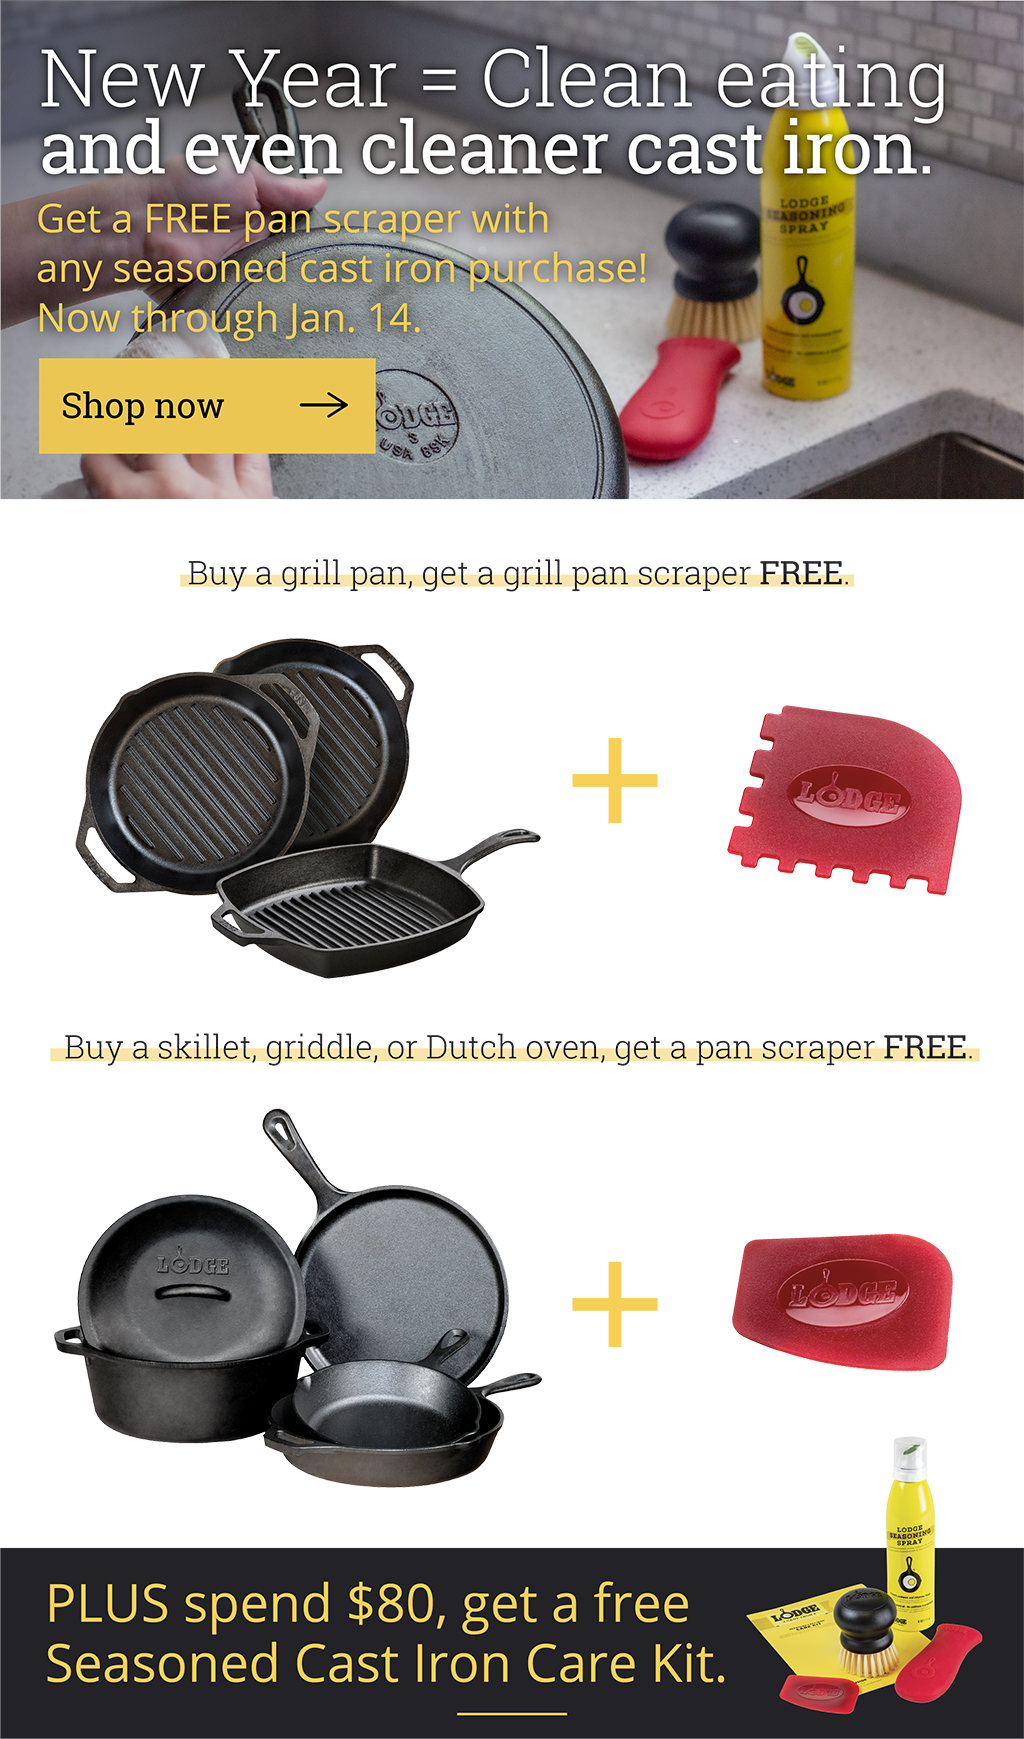 New Year = Clean eating and even cleaner cast iron  Get a FREE pan scraper with any seasoned cast iron purchase! Now through Jan. 14. [Shop now ?]  Buy a grill pan, get a grill pan scraper FREE. Buy a skillet, griddle, or Dutch oven, get a pan scraper FREE.  PLUS spend $80, get a free Seasoned Cast Iron Care Kit.